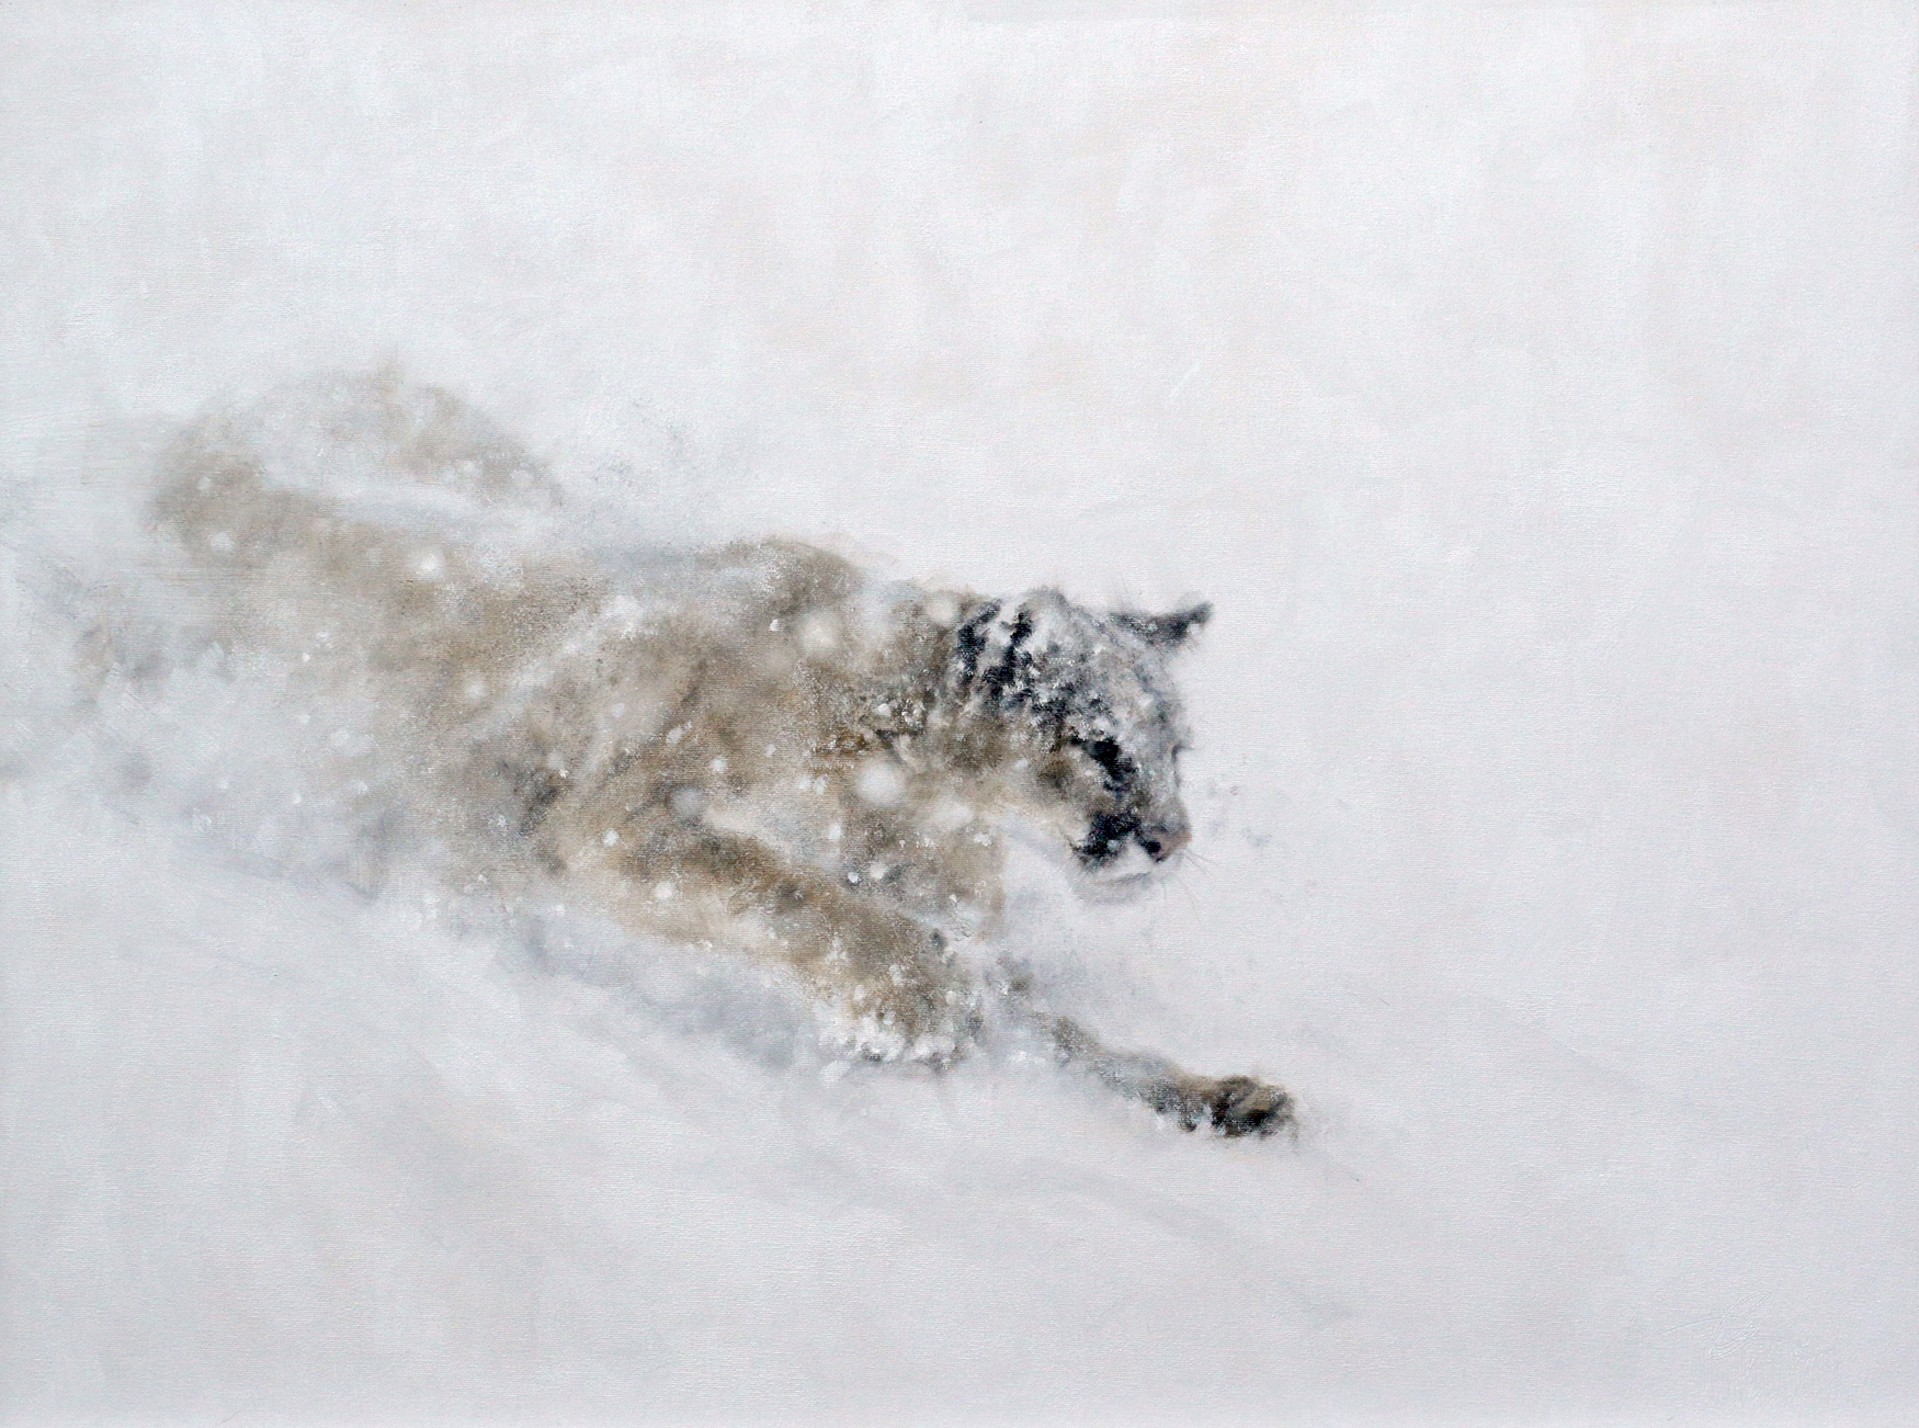 Original Oil Painting Featuring A Cougar Running Through Snow